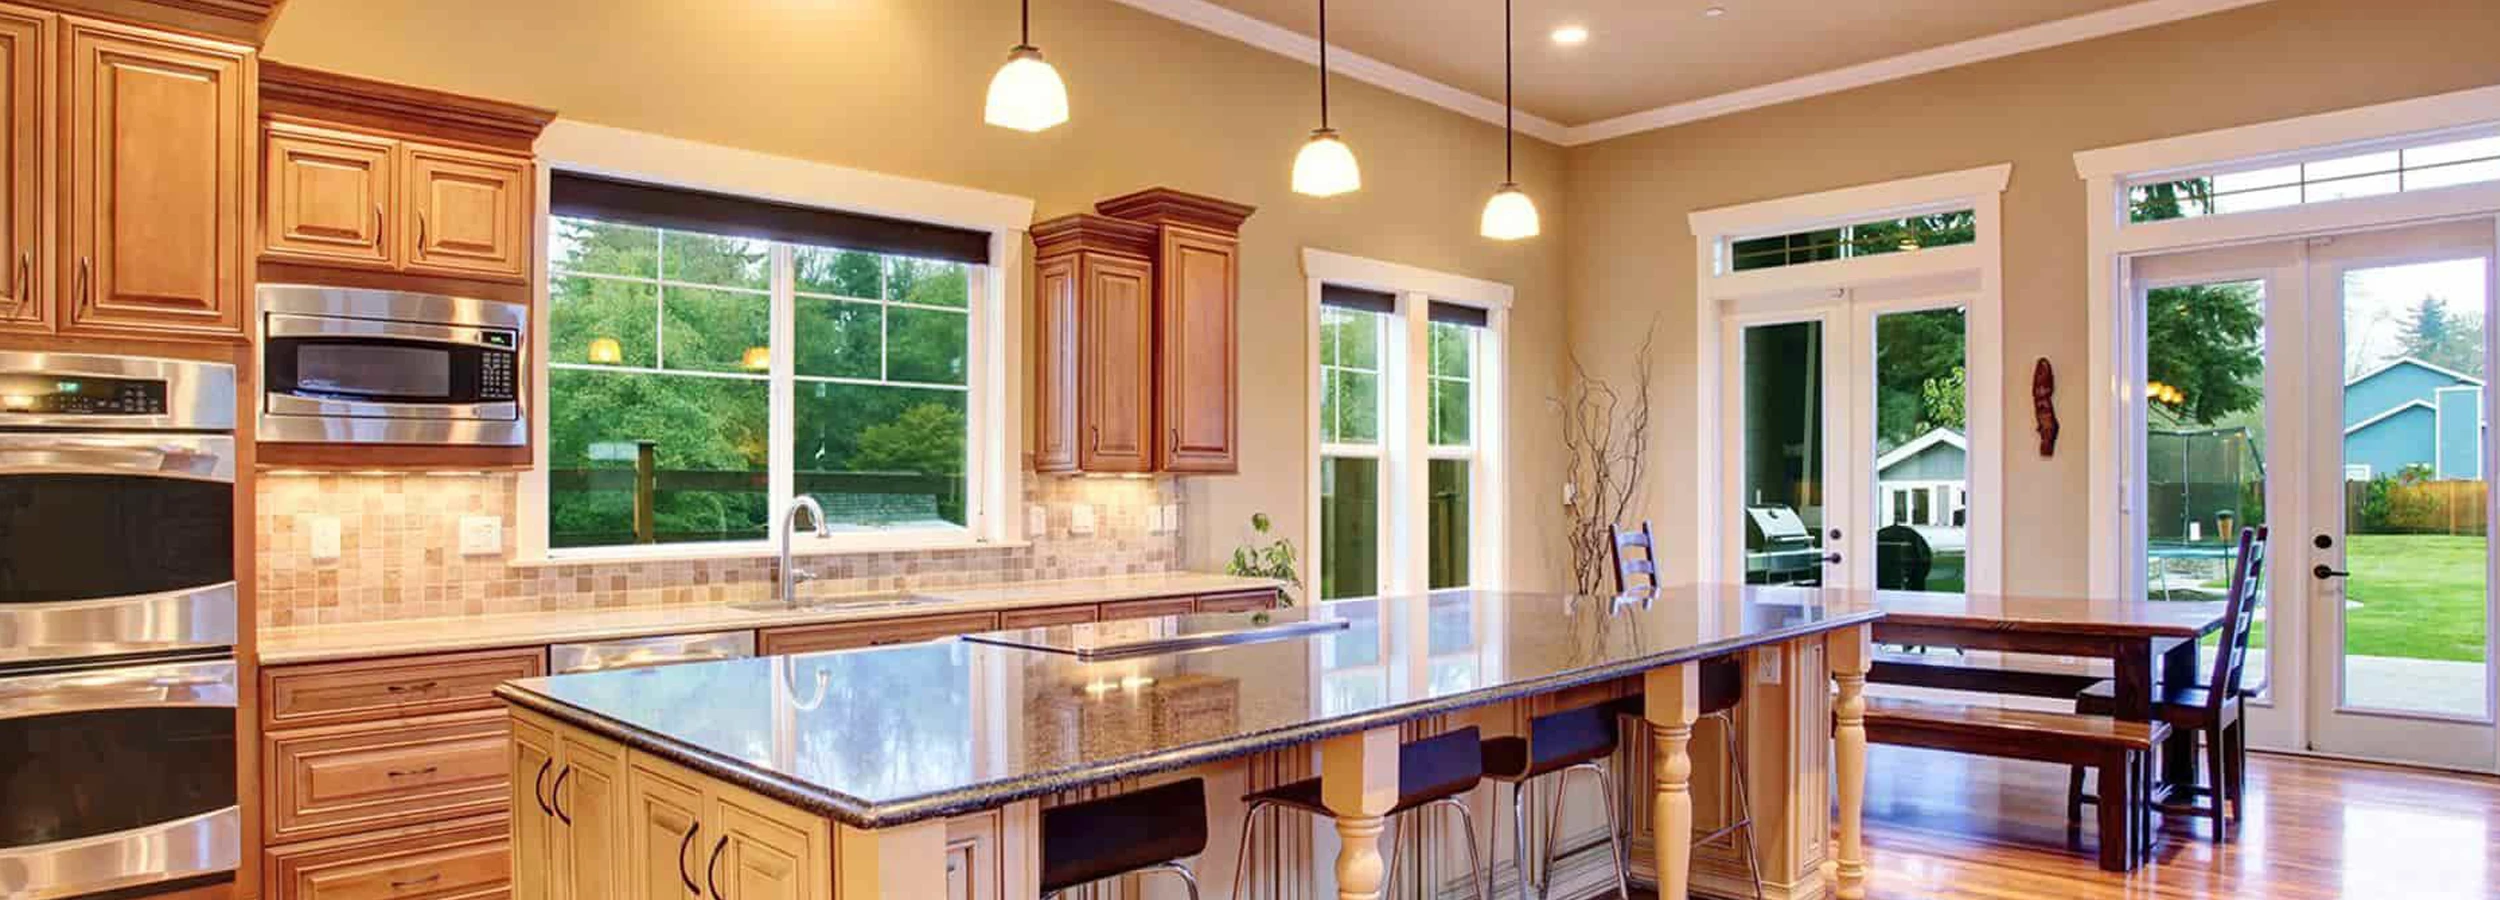 modern kitchen with hardwood floor and light brown tones with marble countertop and bench style dining room table.